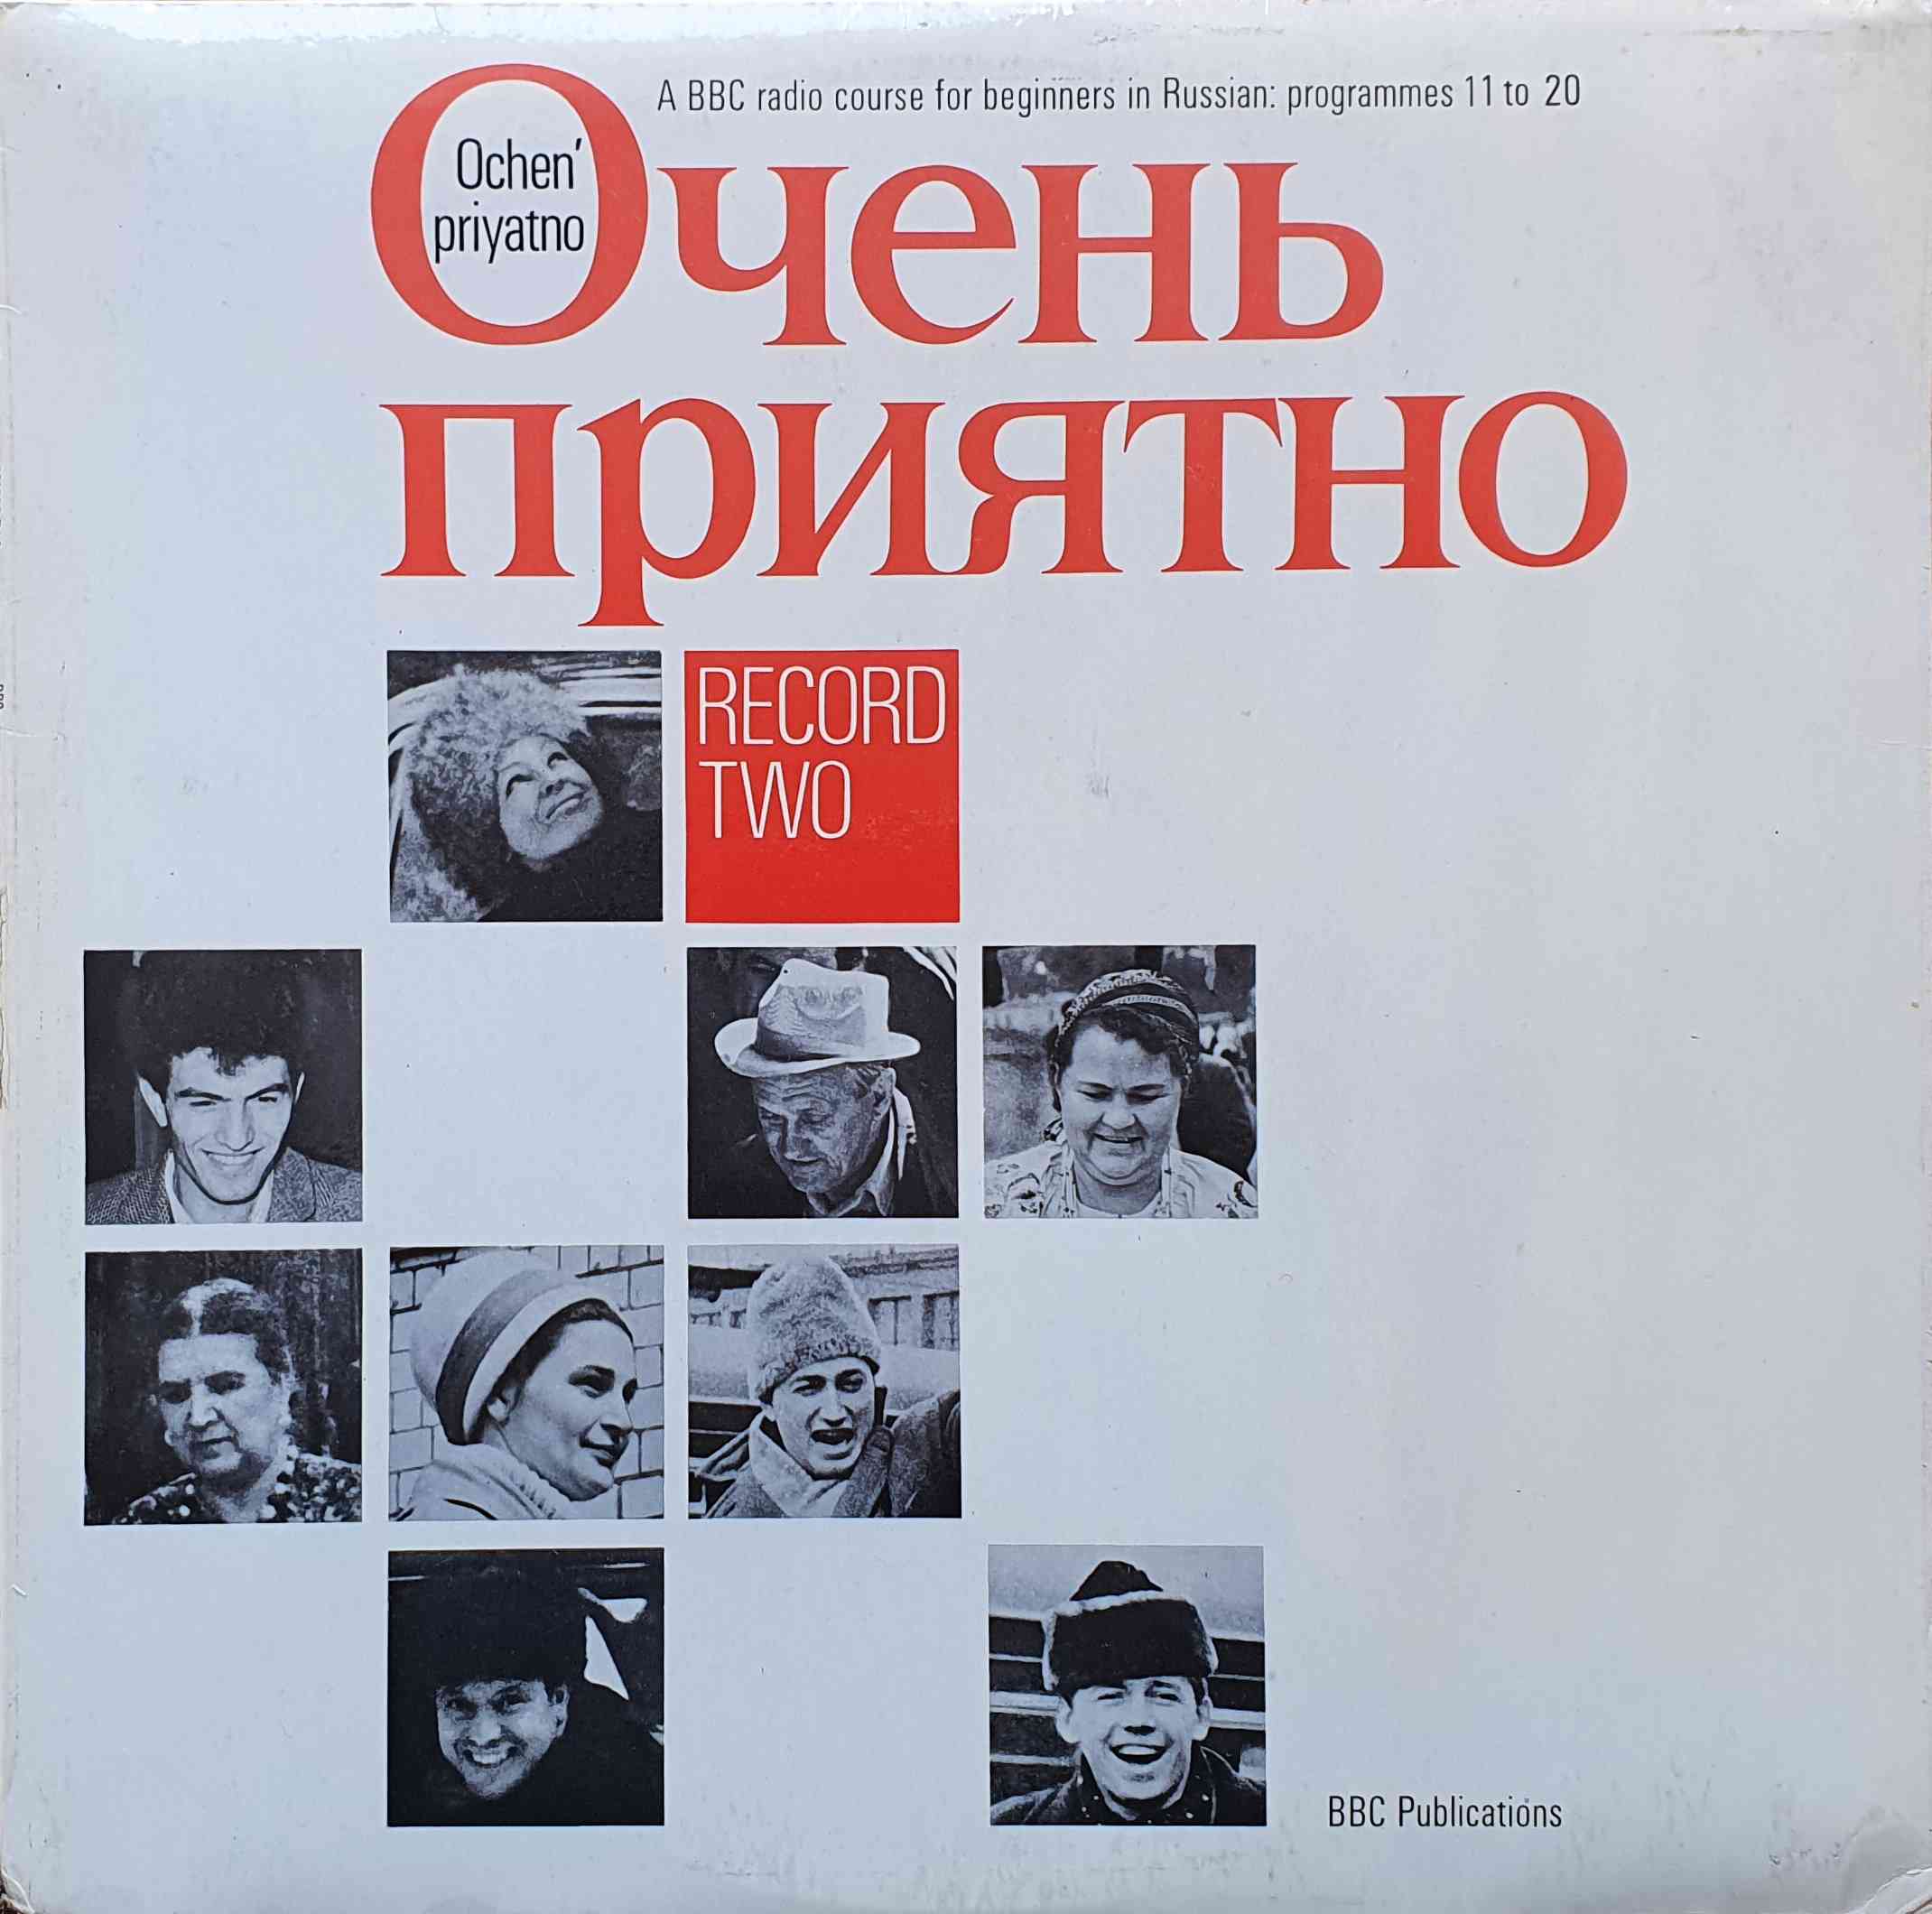 Picture of OP 191/192 Ochen' priyatno Record 2 - A BBC Radio course for beginners in Russian - Record 2 - Programmes 11 - 20 by artist Michael L. Frewin / Albina Braithwaite from the BBC albums - Records and Tapes library